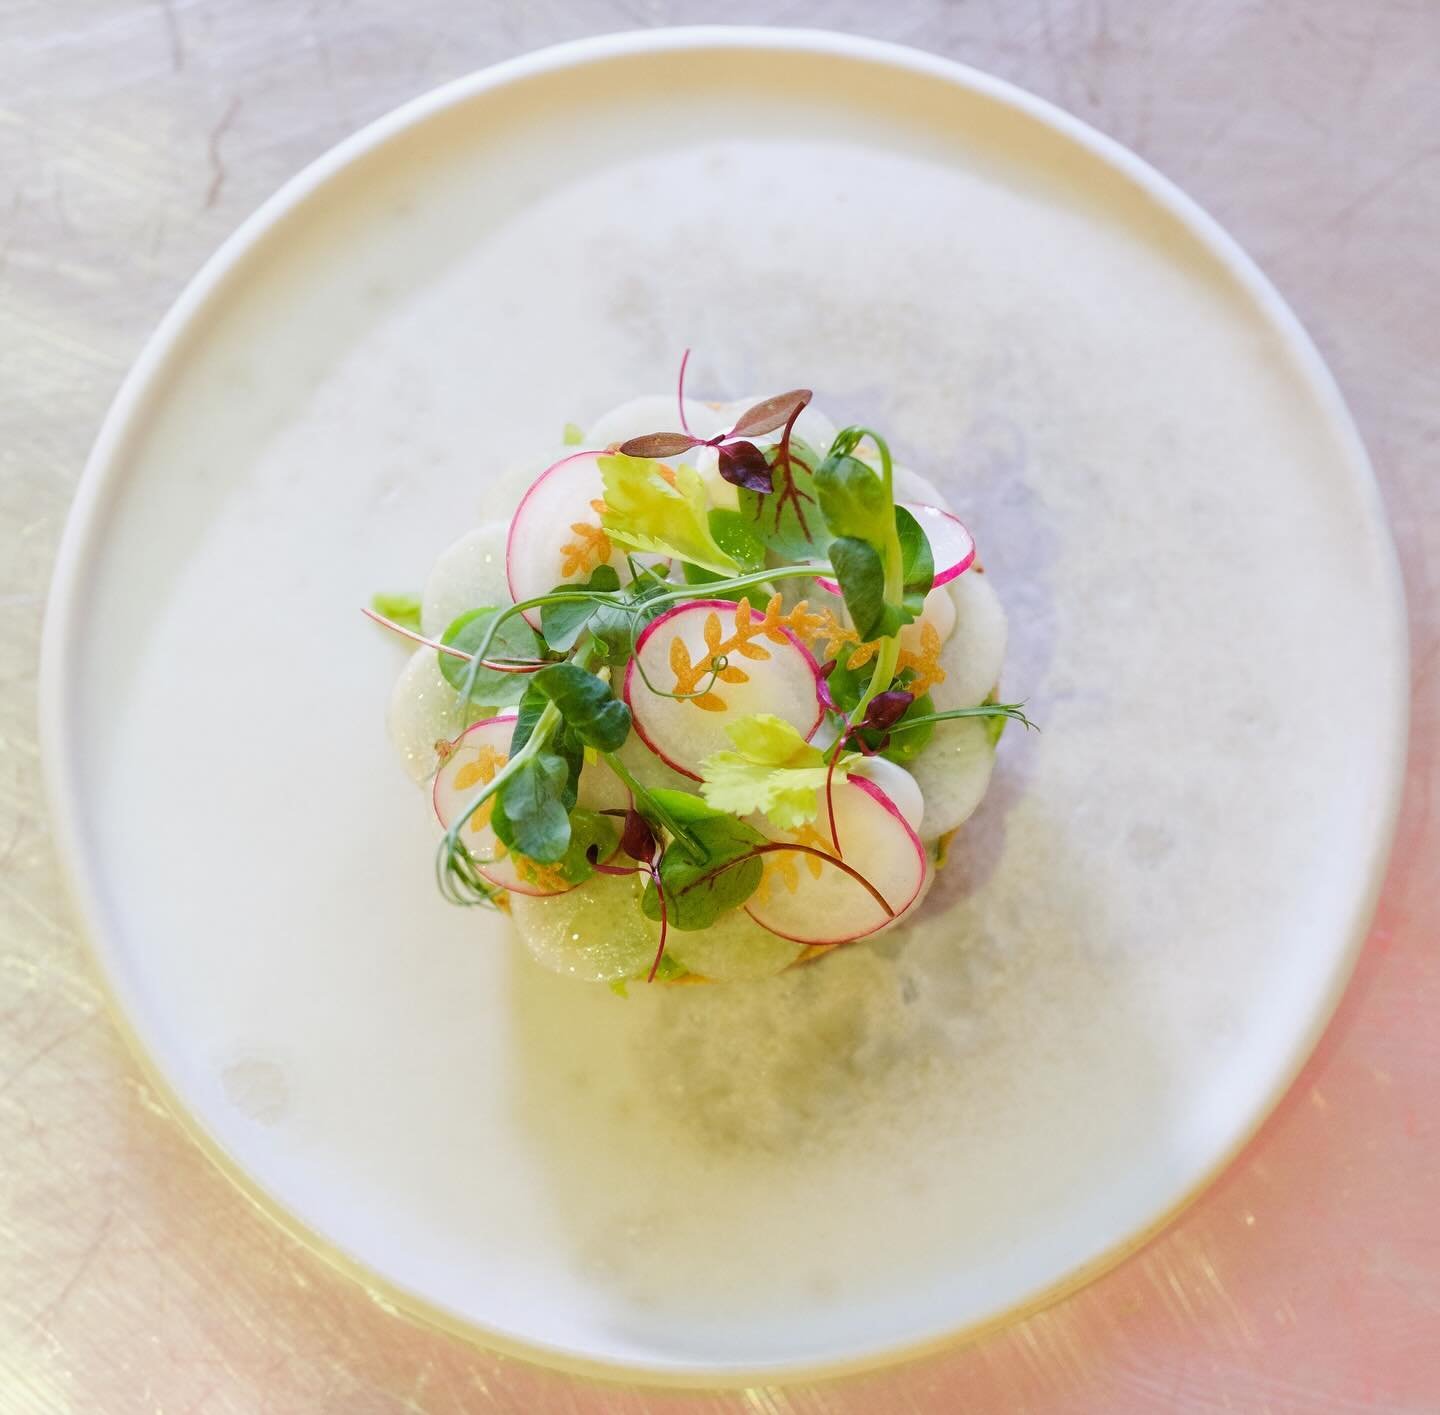 Head chef for Gather &amp; Gather Ireland Ciaran McGill&rsquo;s starter and main that won him CH&amp;CO Chef of the Year 2024 - full story is on our website (link is in our bio) 

#contractcatering #contractcateringmagazine #contractcaterer #catering